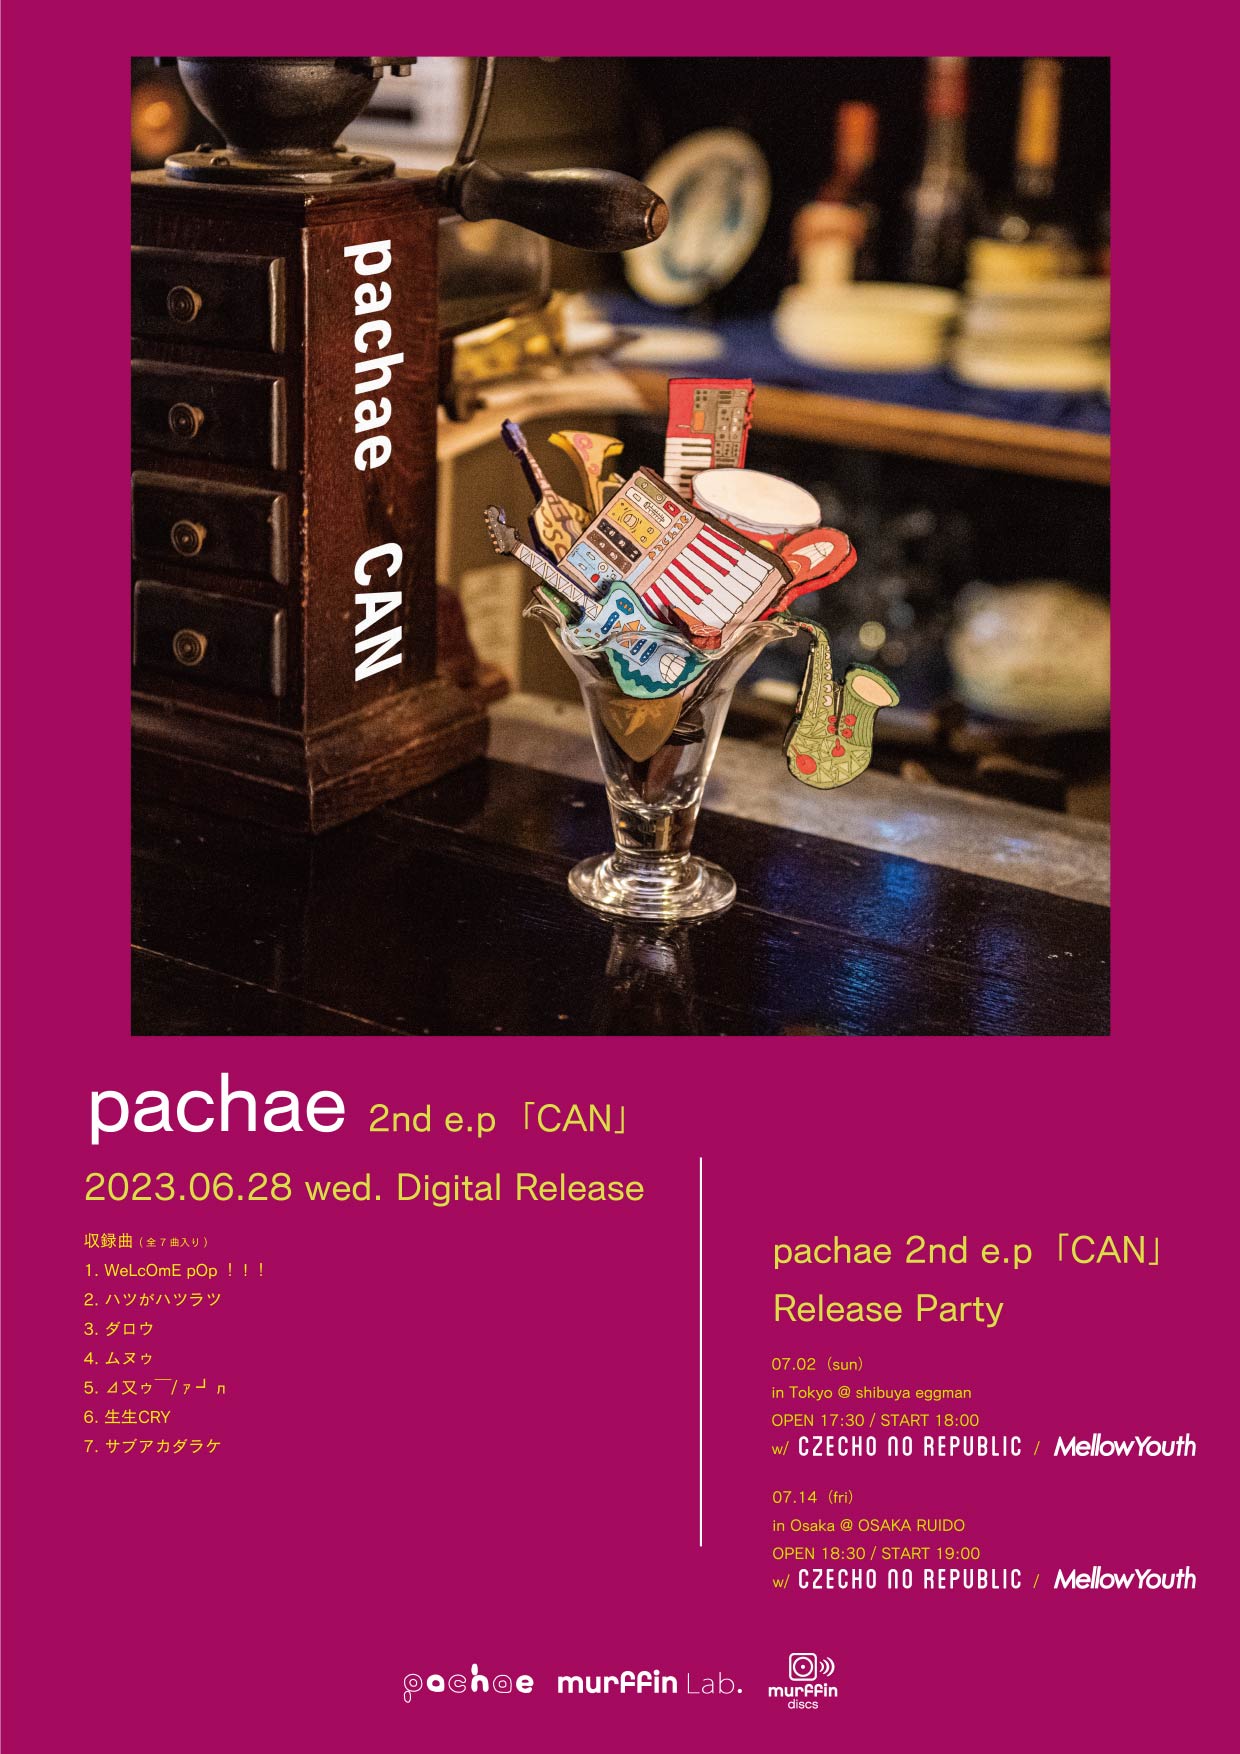 pachae 2nd e.p「CAN」Release Party in Tokyo